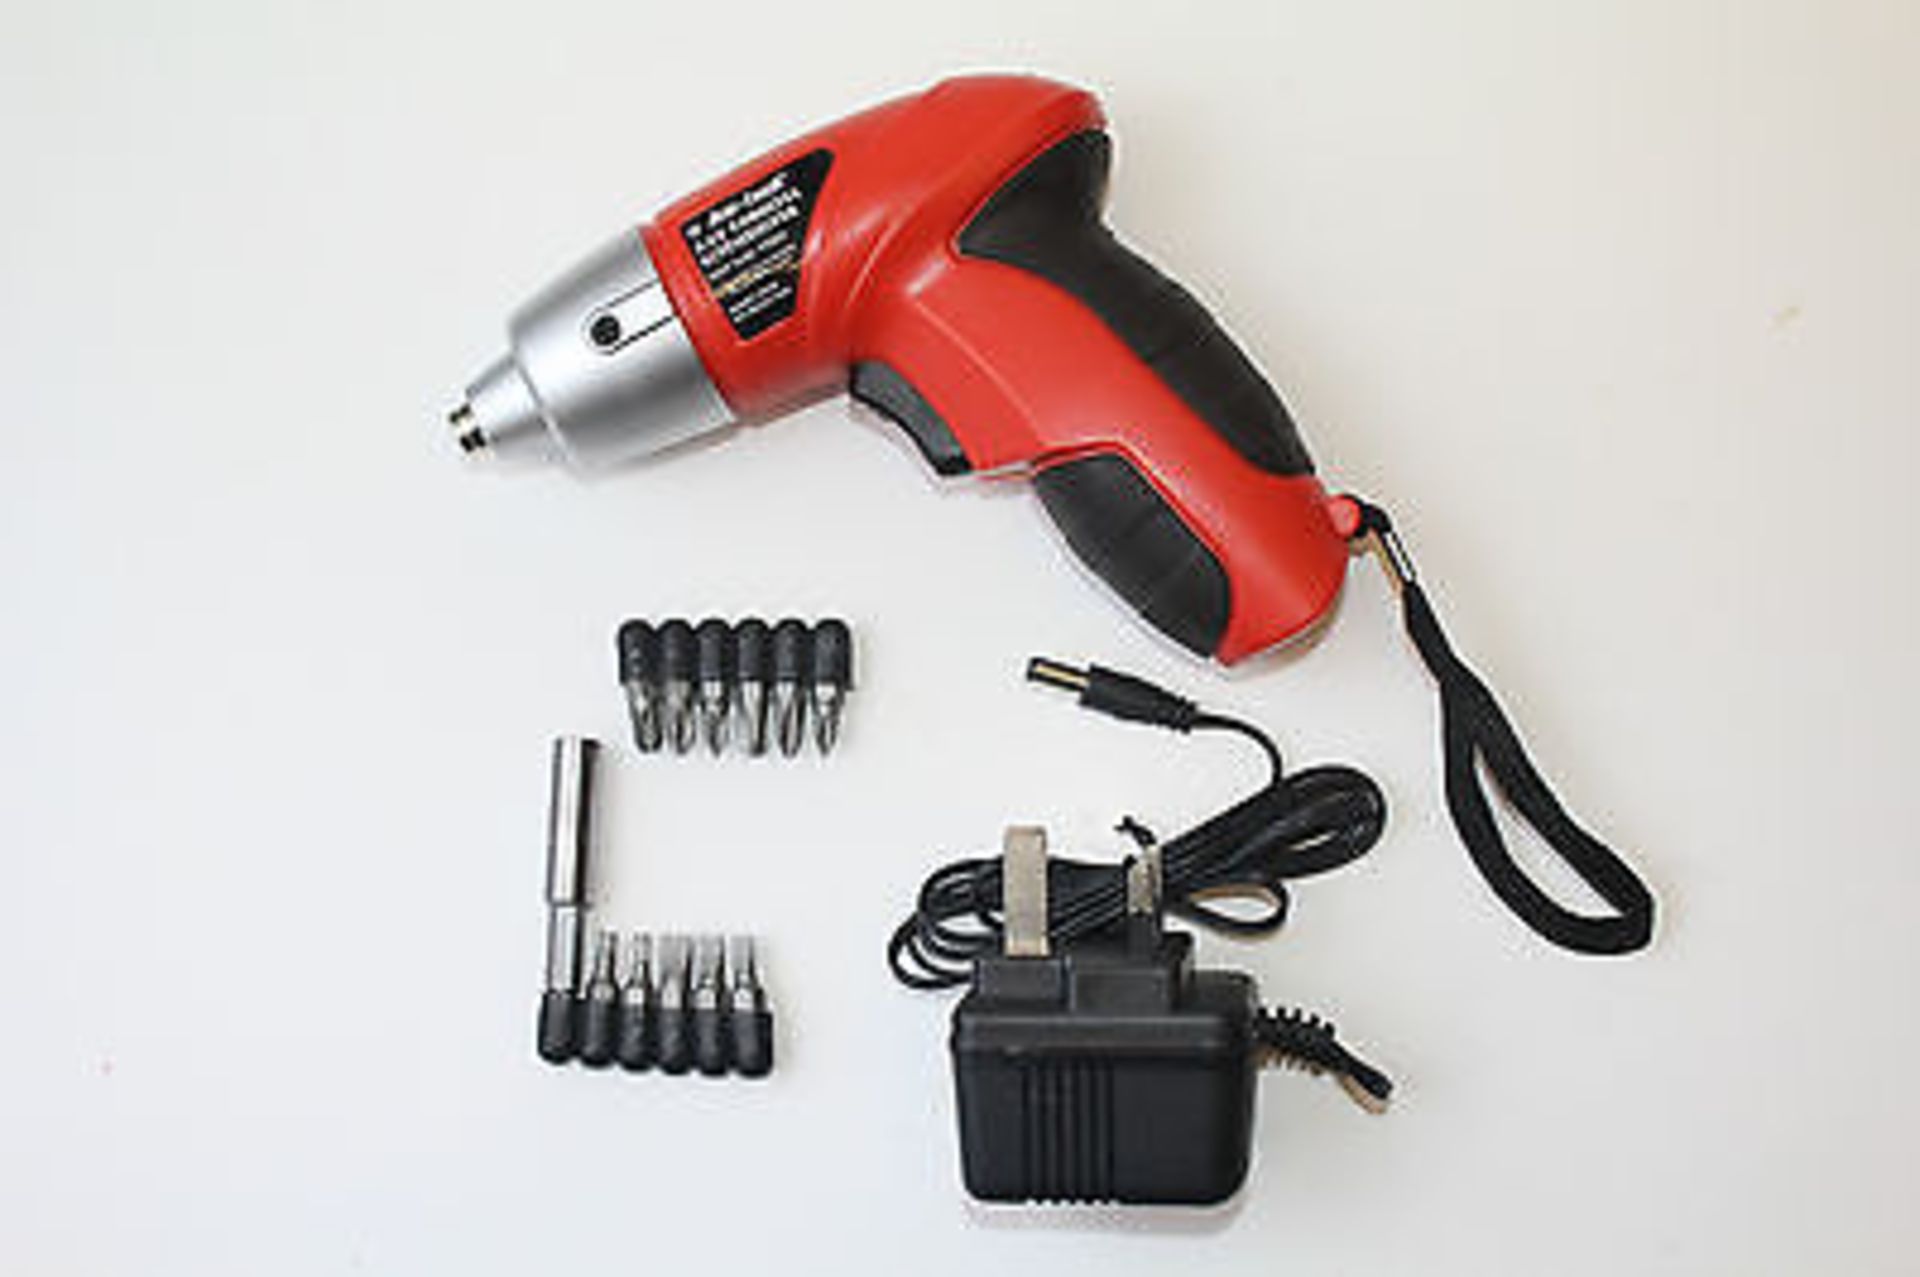 V *TRADE QTY* Brand New 3.6V Cordless Screwdriver X 4 YOUR BID PRICE TO BE MULTIPLIED BY FOUR